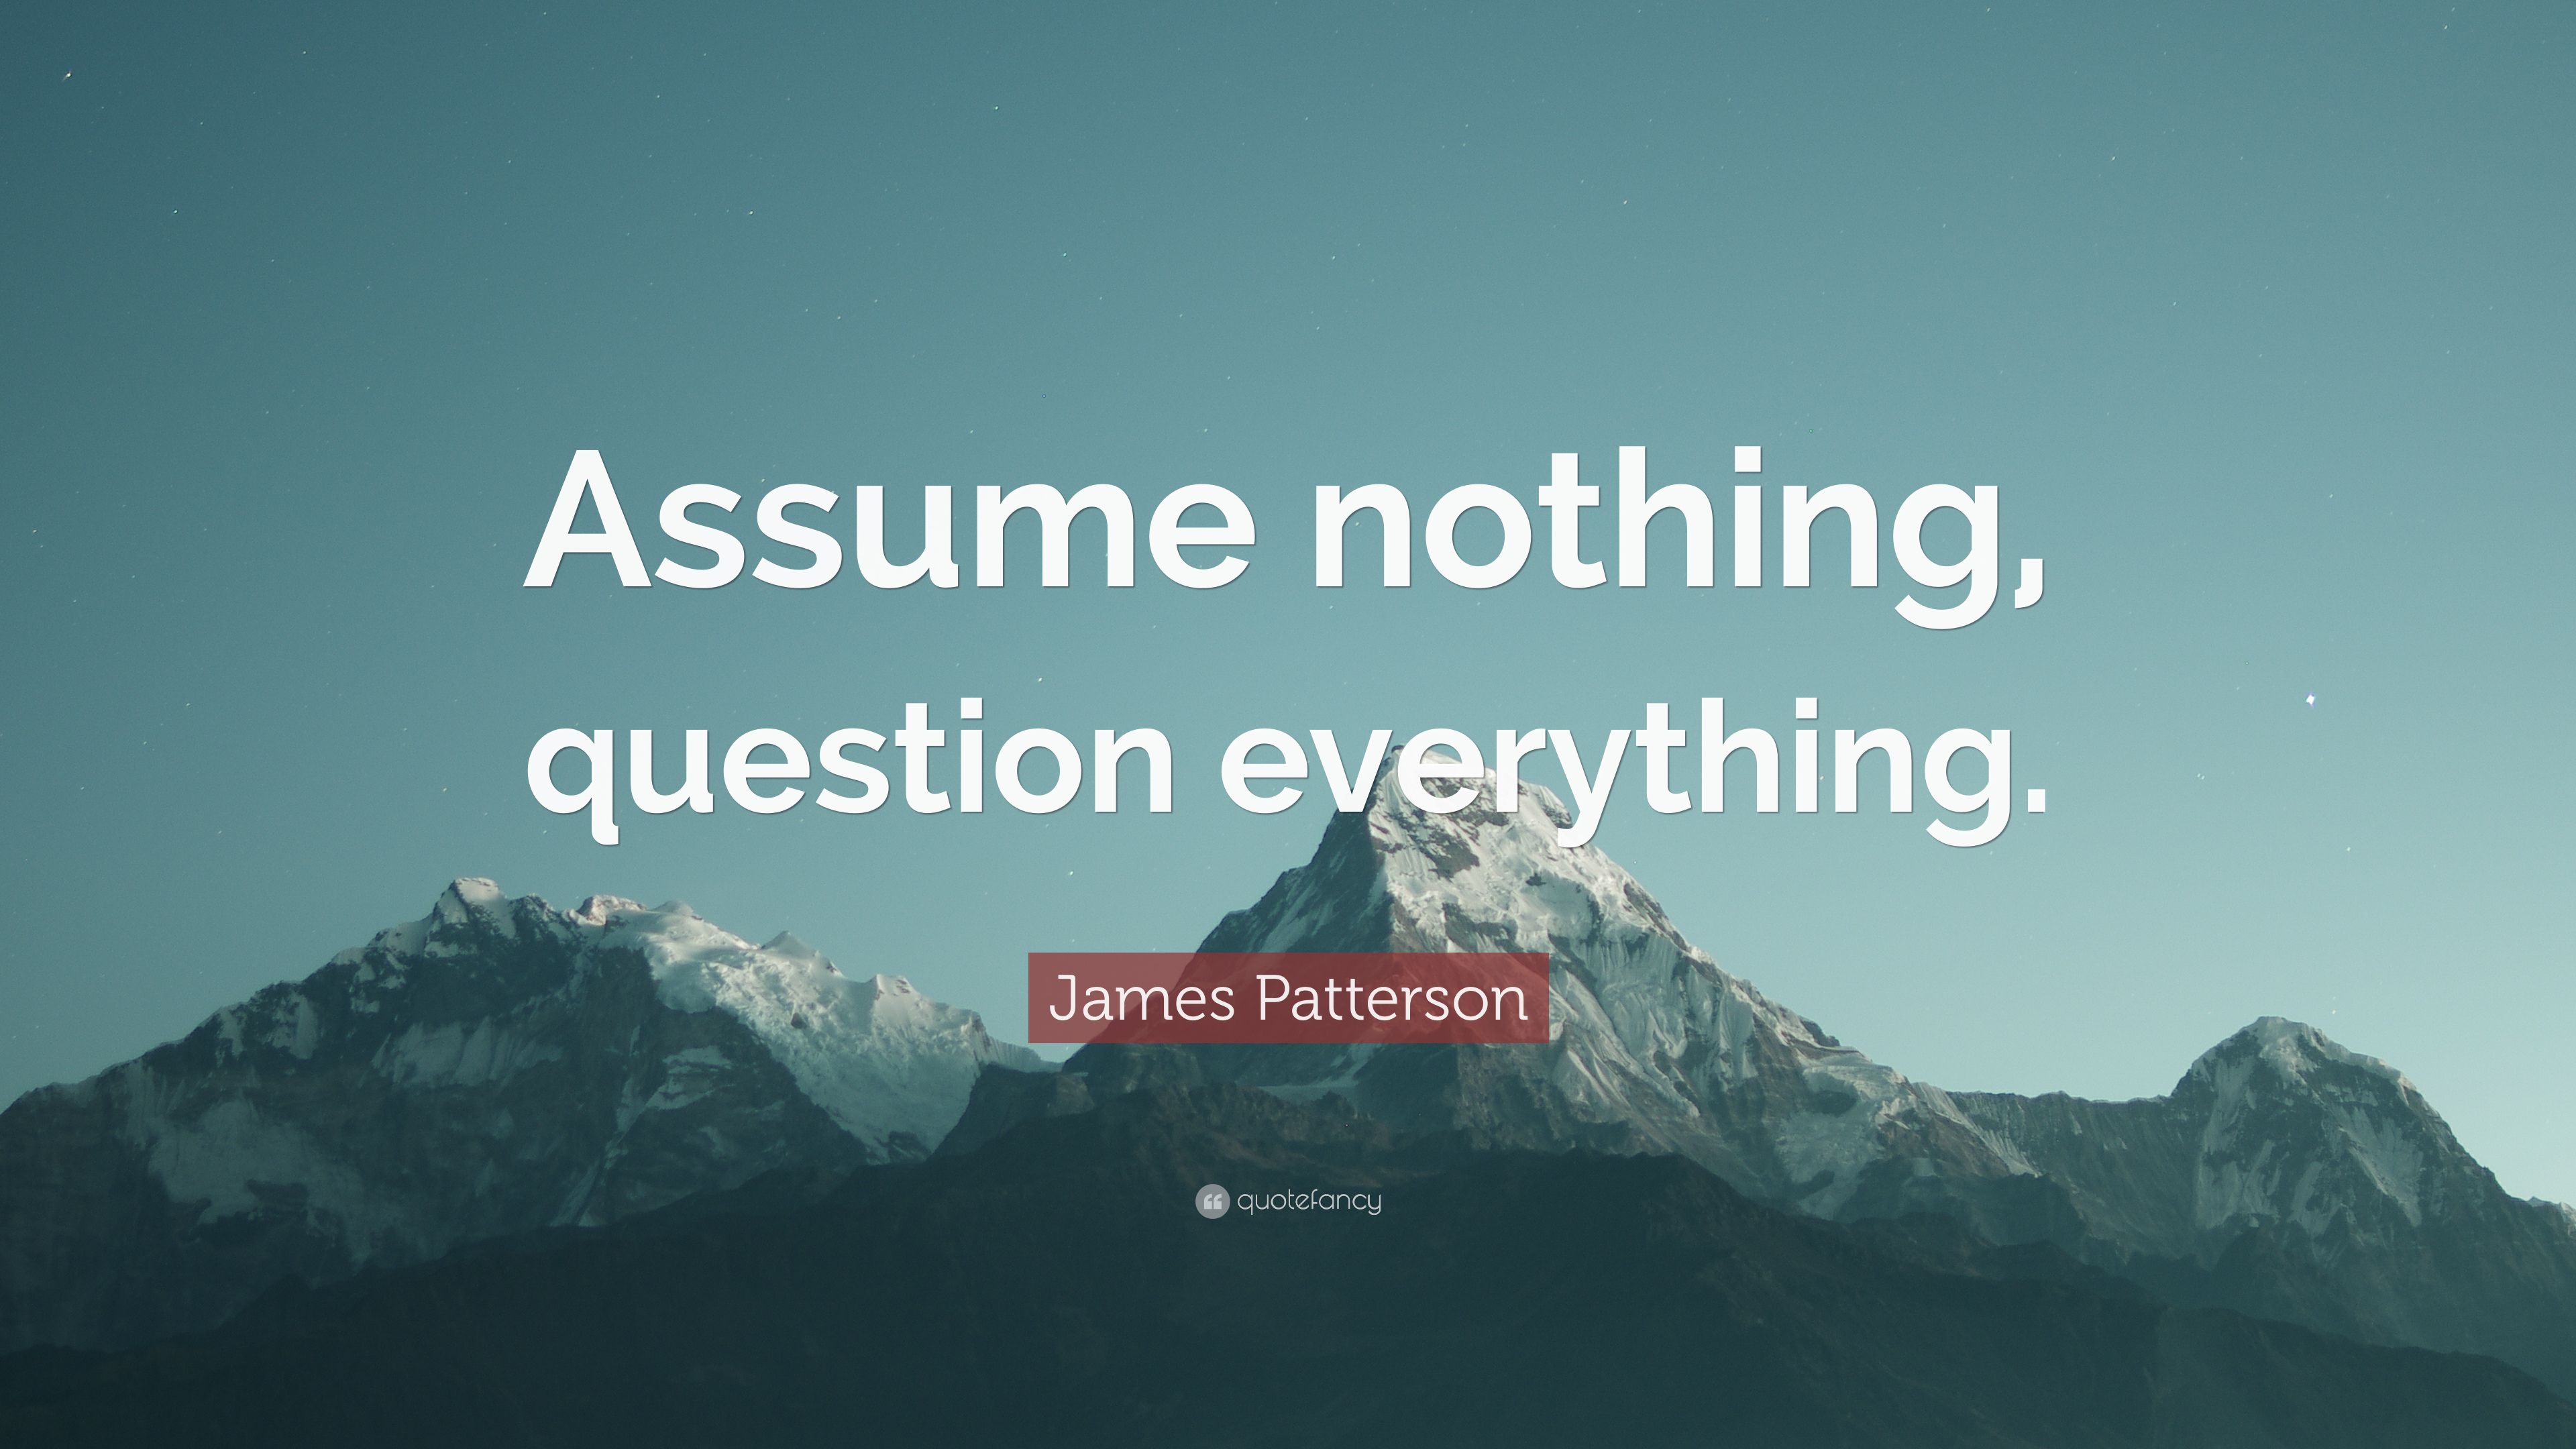 James Patterson Quote: “Assume nothing, question everything.” (12 wallpaper)